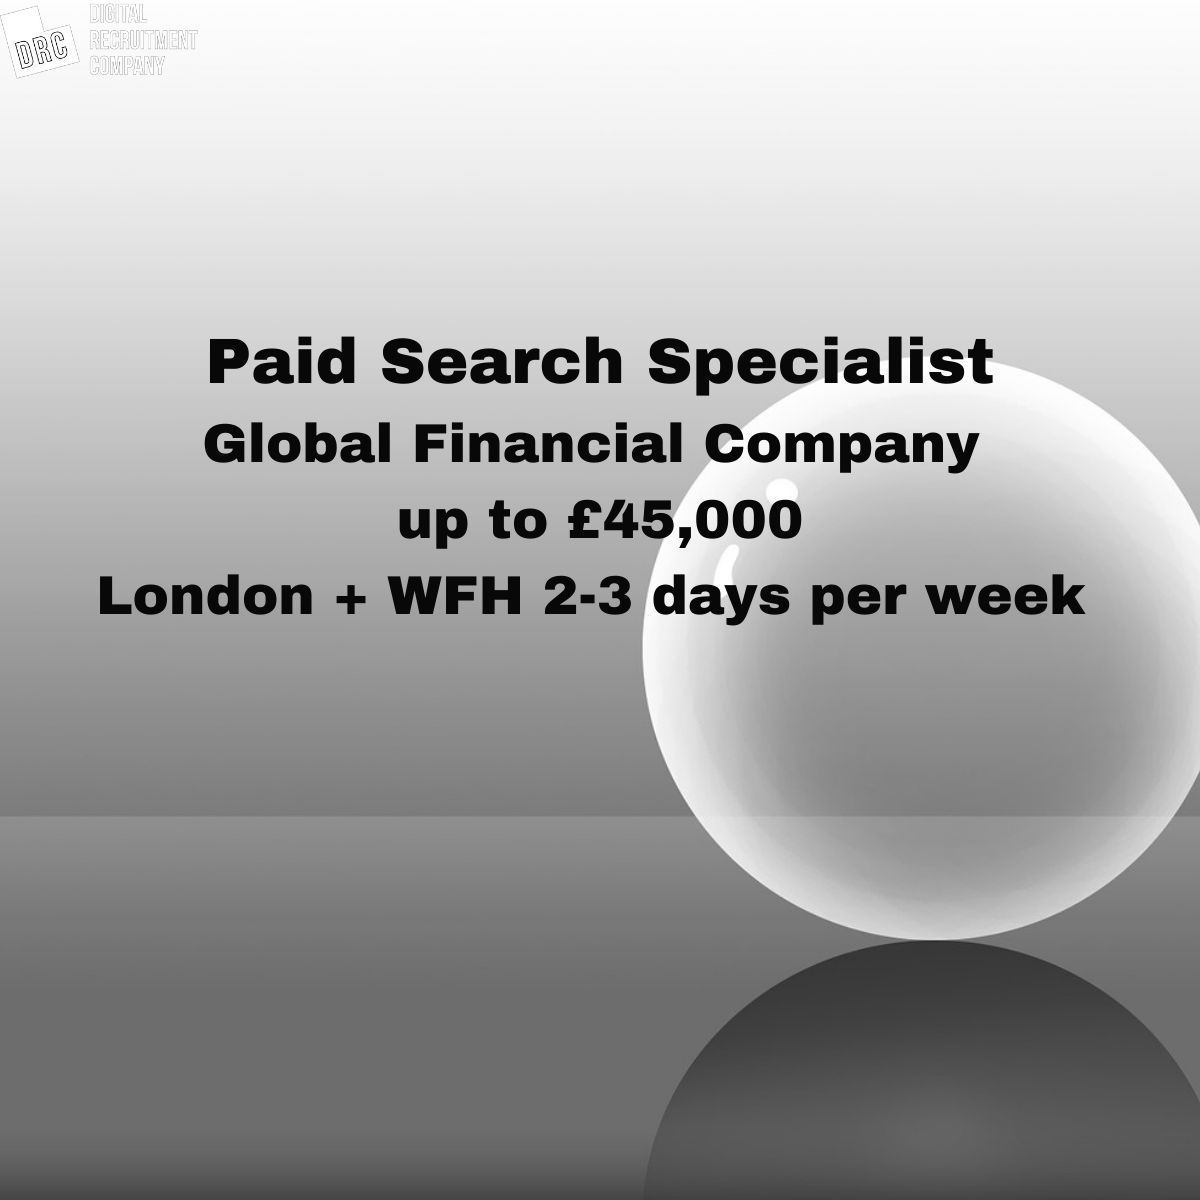 New role for a #paidsearchspecialist based in #London and #WFH for financial company.

Salary; up to £45,000

If interested contact Toby; toby@digitalrecruitmentcompany.com
#hiring #digijobs #searchspecialist #ppc #ppcexpert #ppcadvertising #socialmedia #digitalmarketing